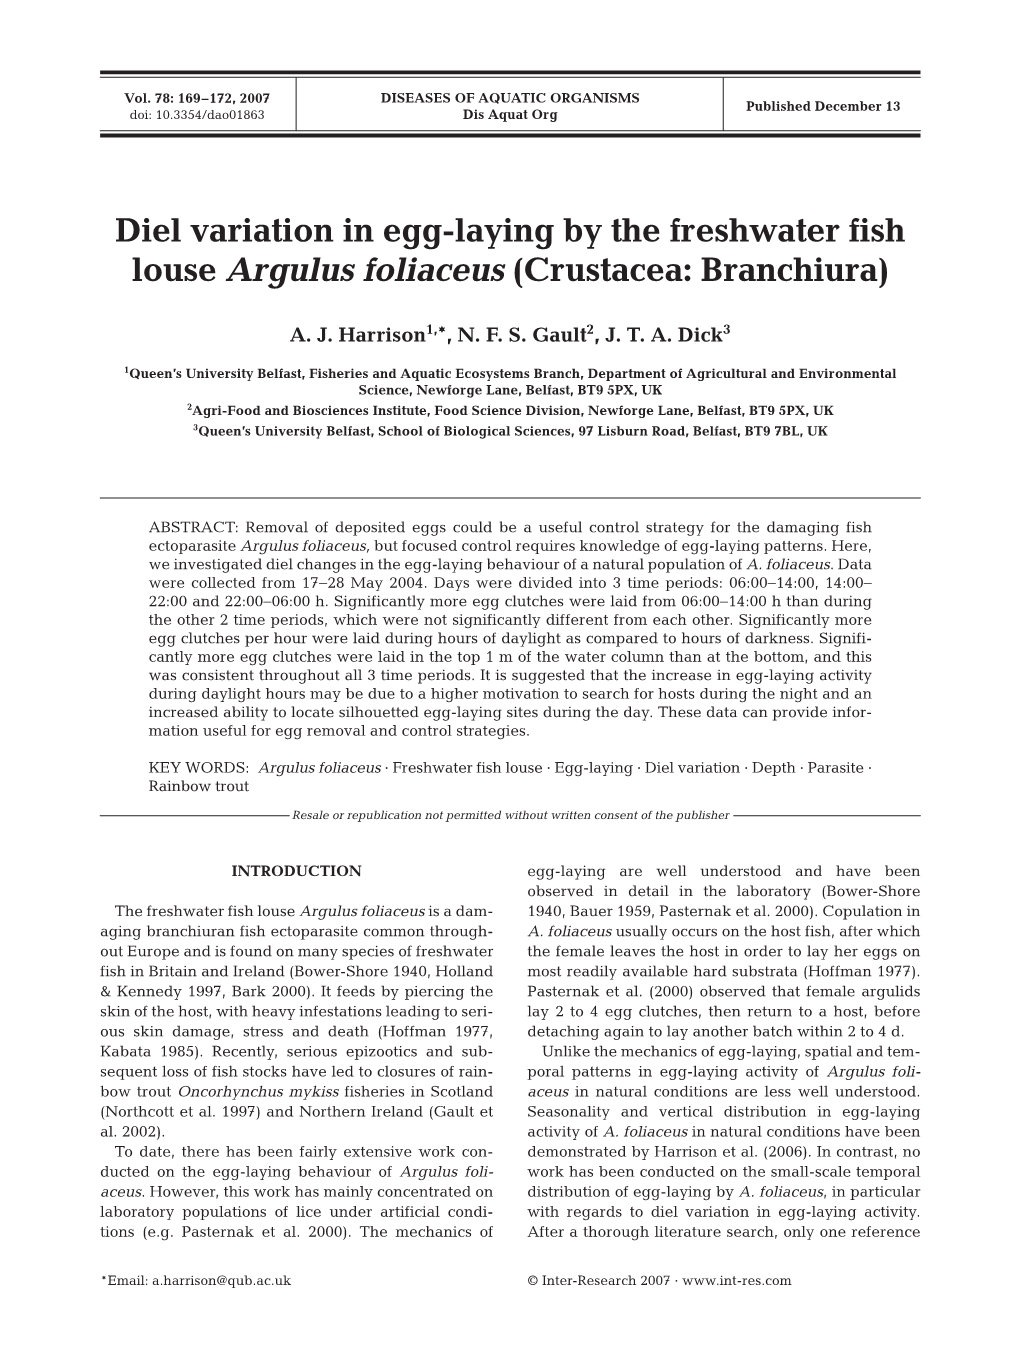 Diel Variation in Egg-Laying by the Freshwater Fish Louse Argulus Foliaceus (Crustacea: Branchiura)